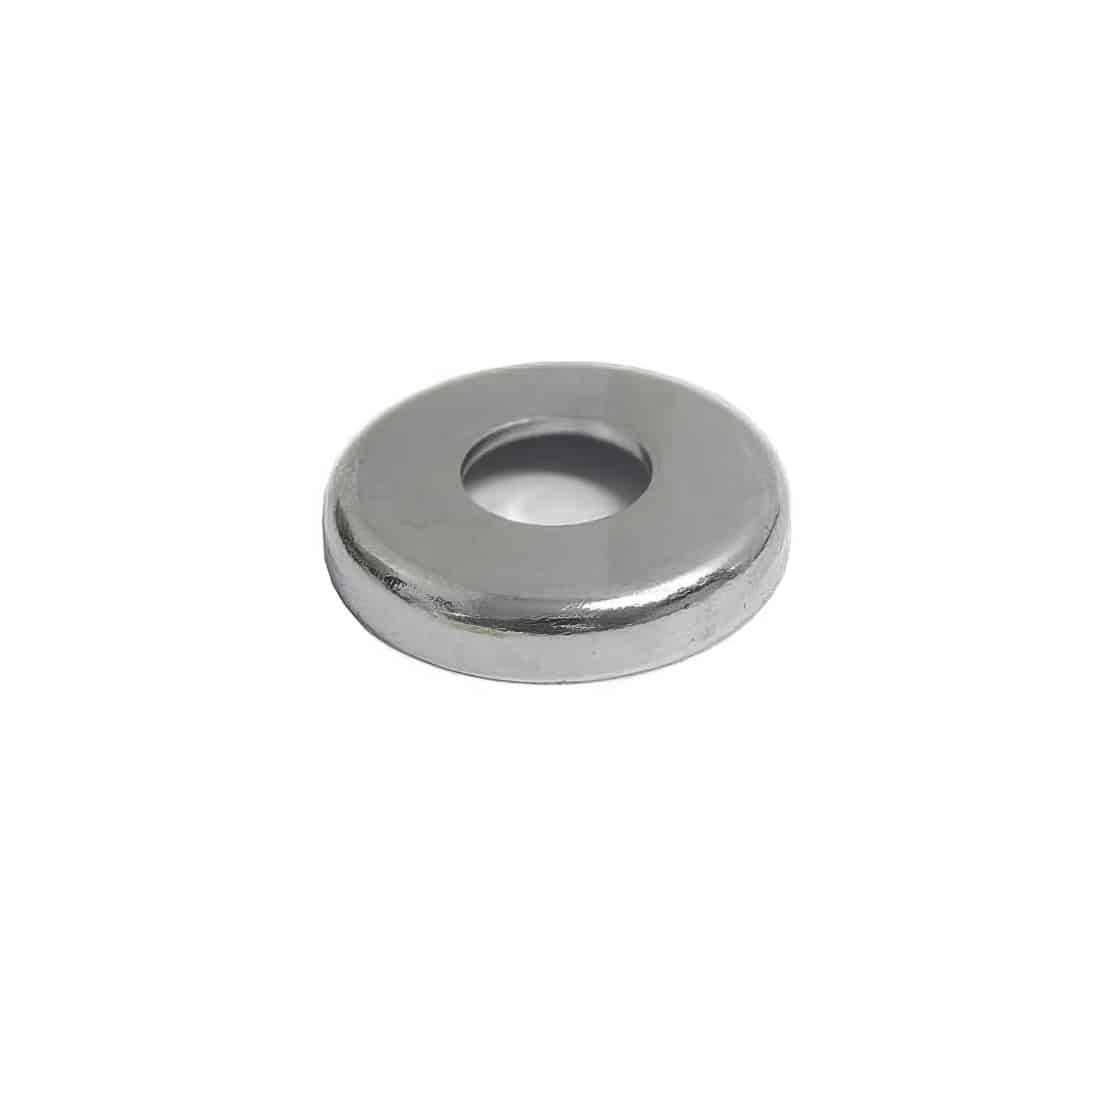 Valve Cover Nut Cup Washer, Chrome (GM40K)